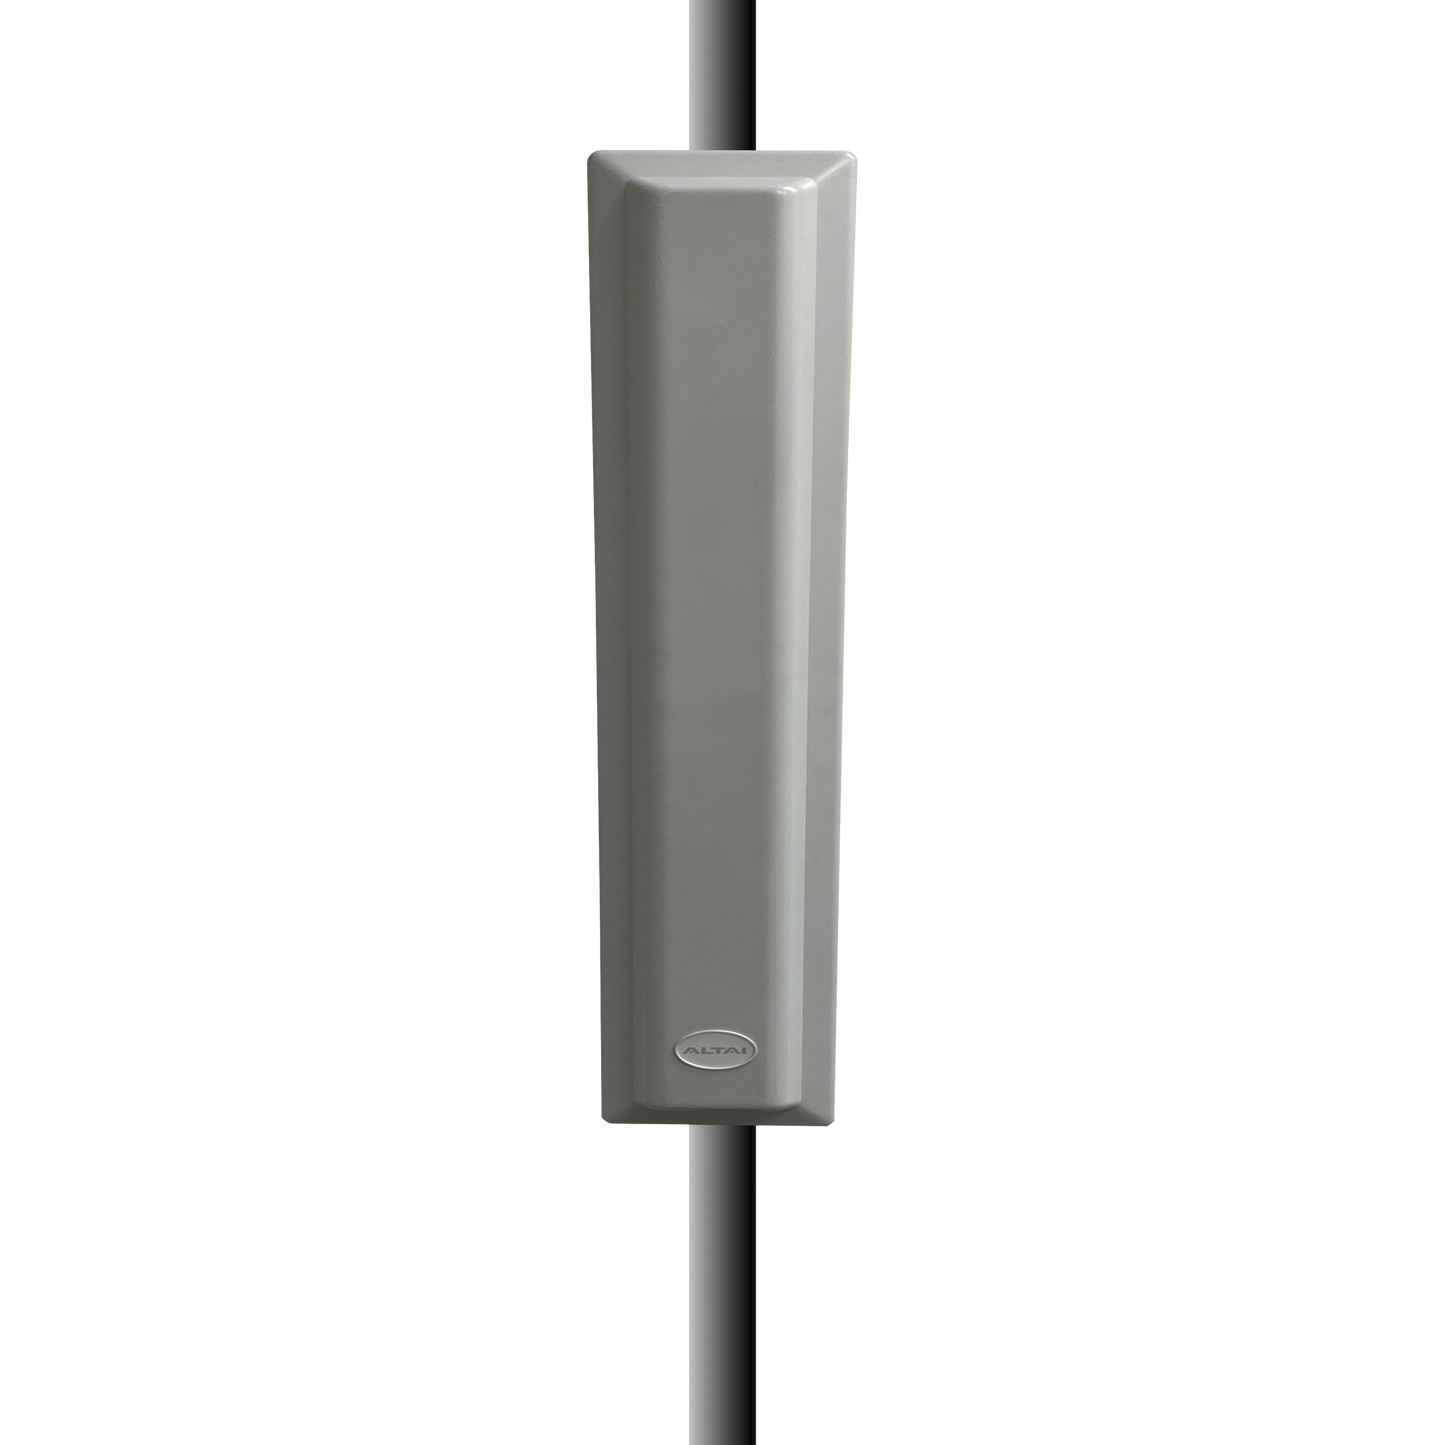 2.4 GHz 15 dBi Sector Antenna Custom-Made for the C1xn Series